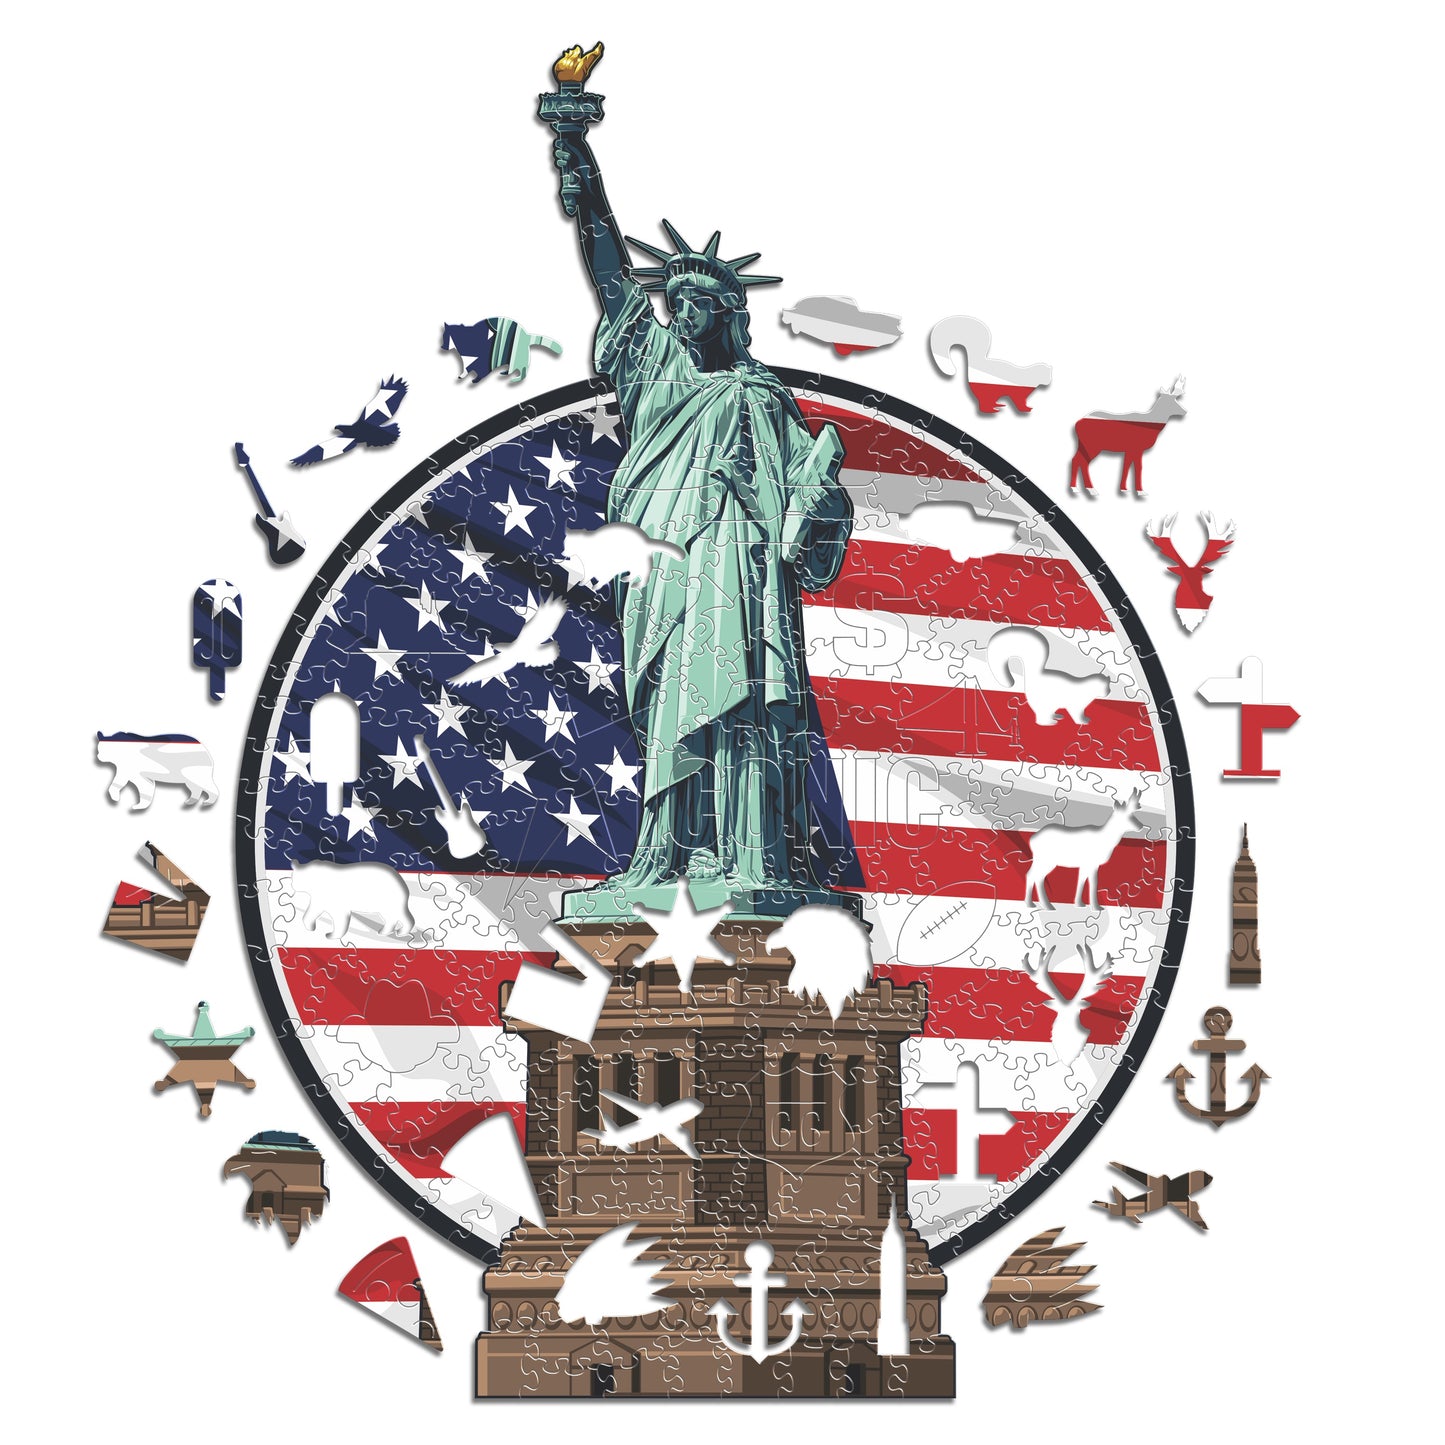 Statue of Liberty - Wooden Puzzle